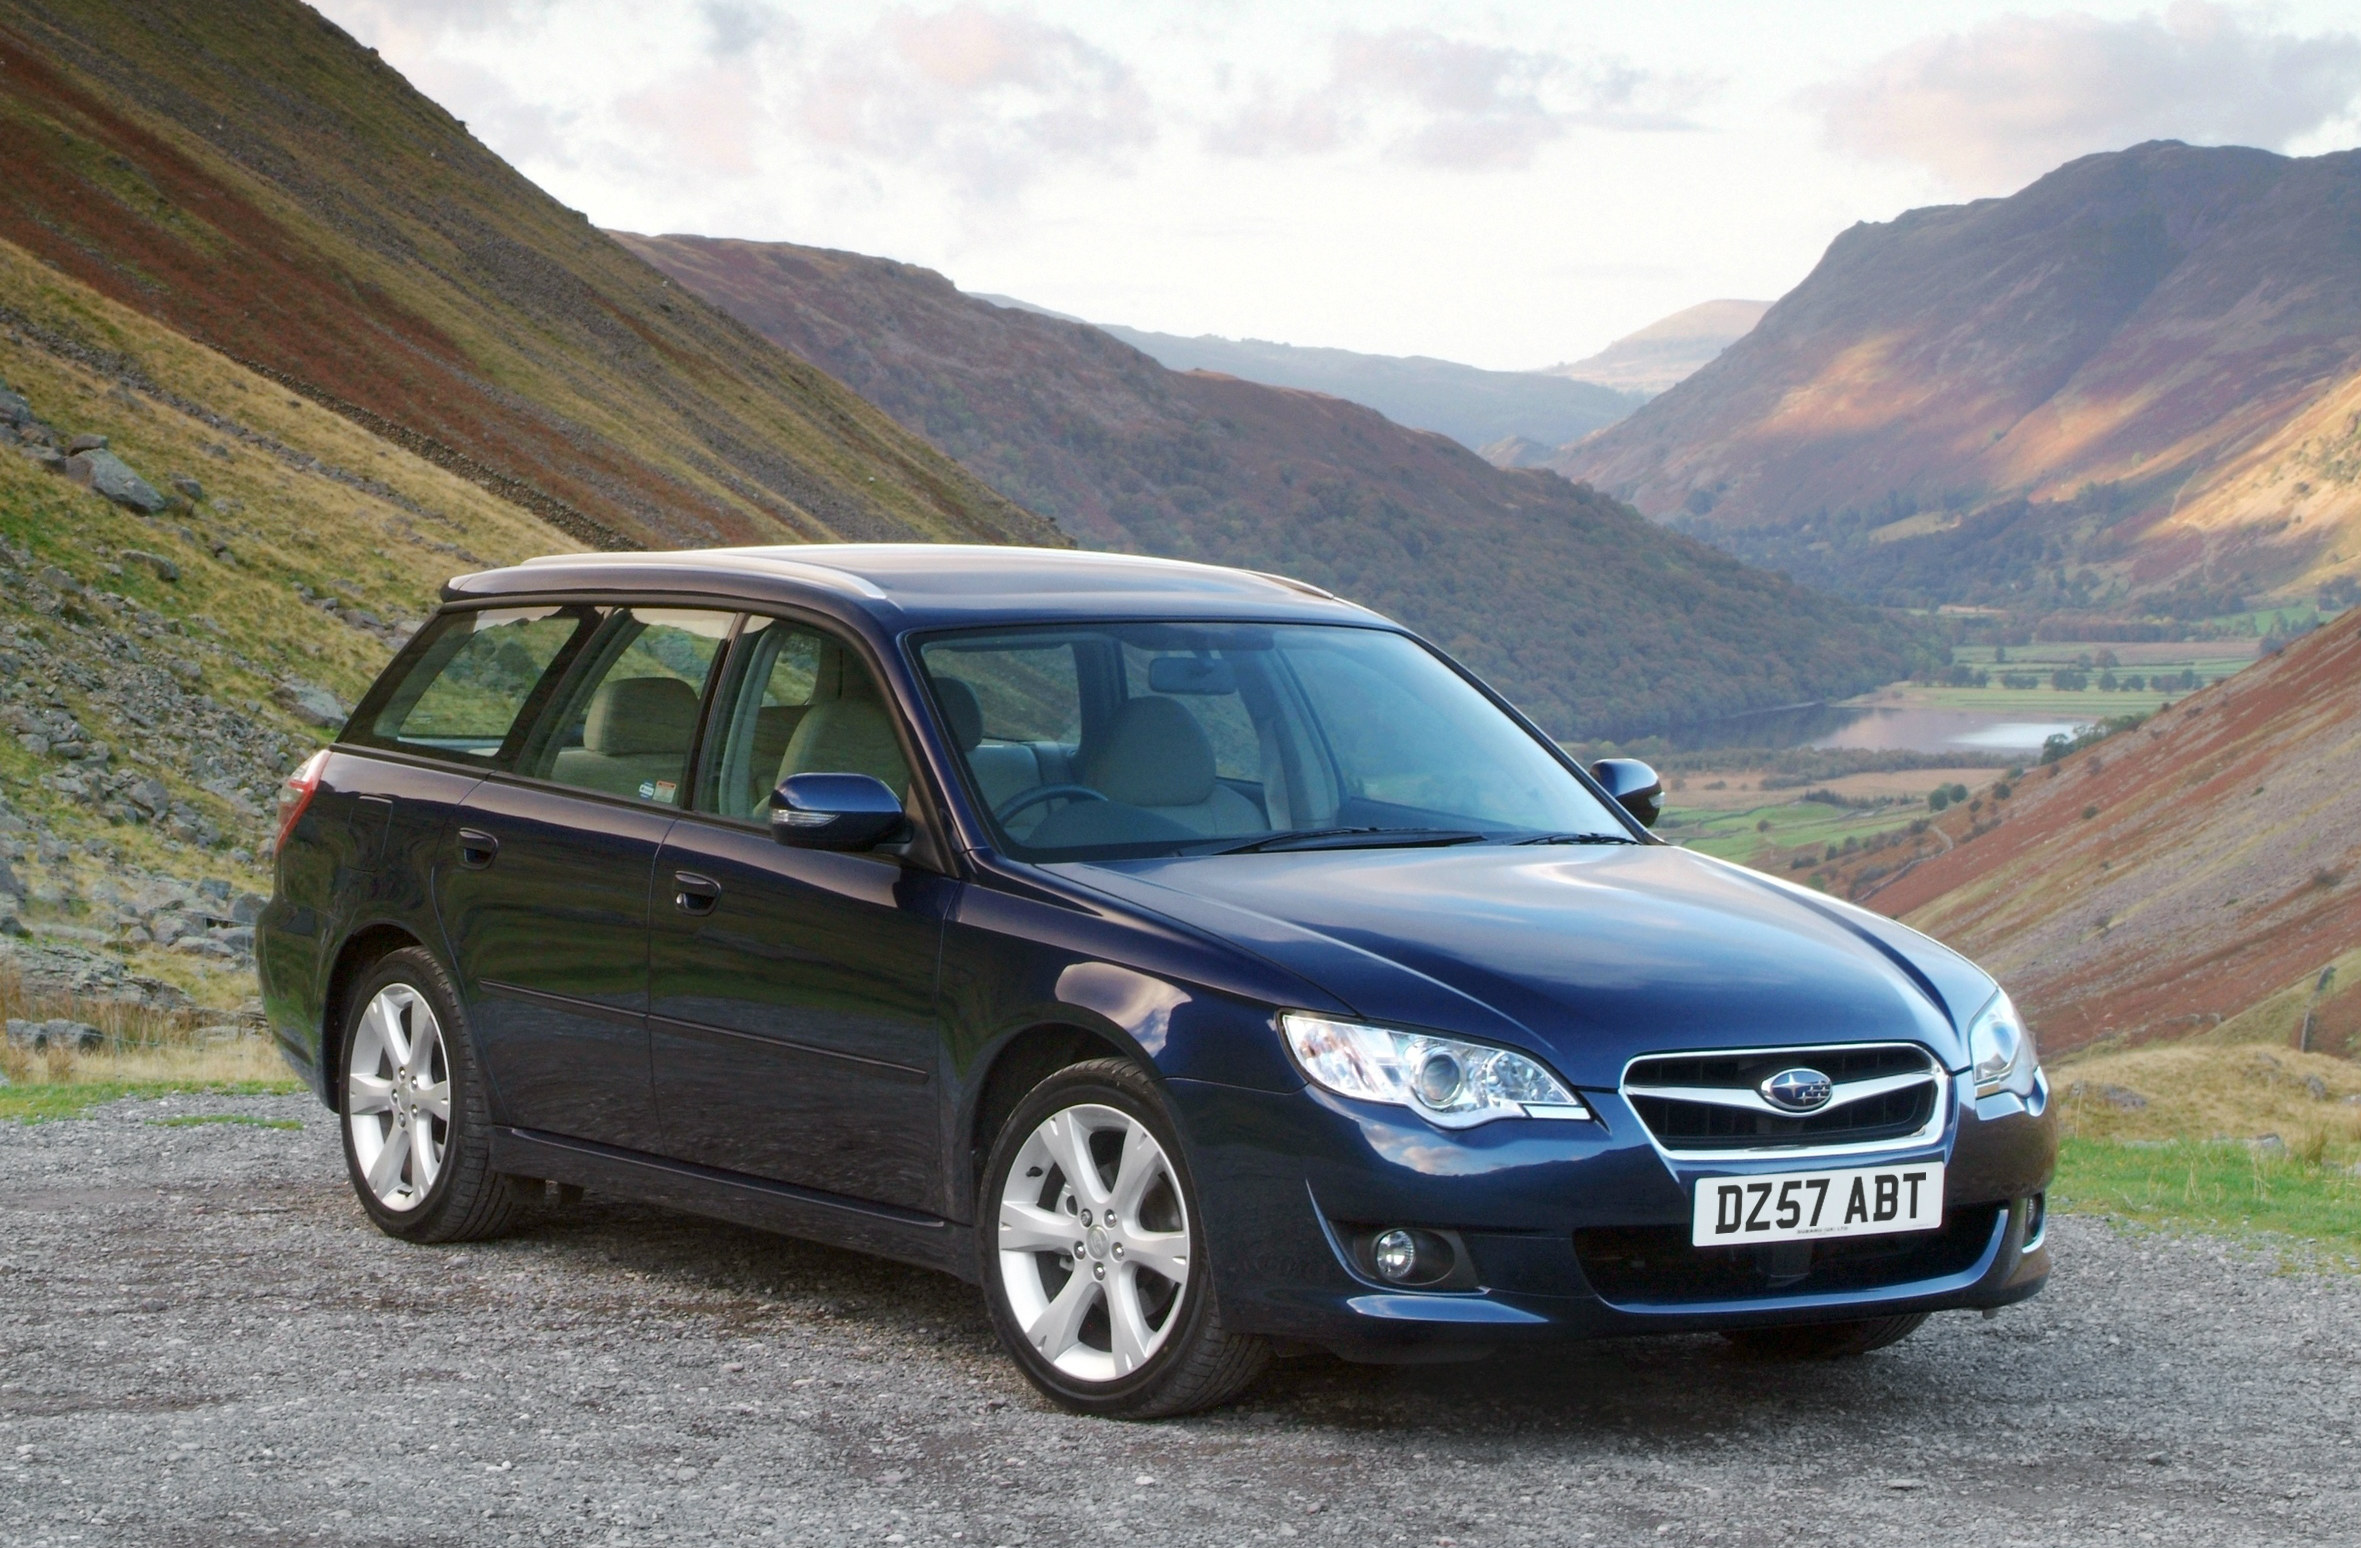 Buying Guide: used four-wheel drive cars for the winter